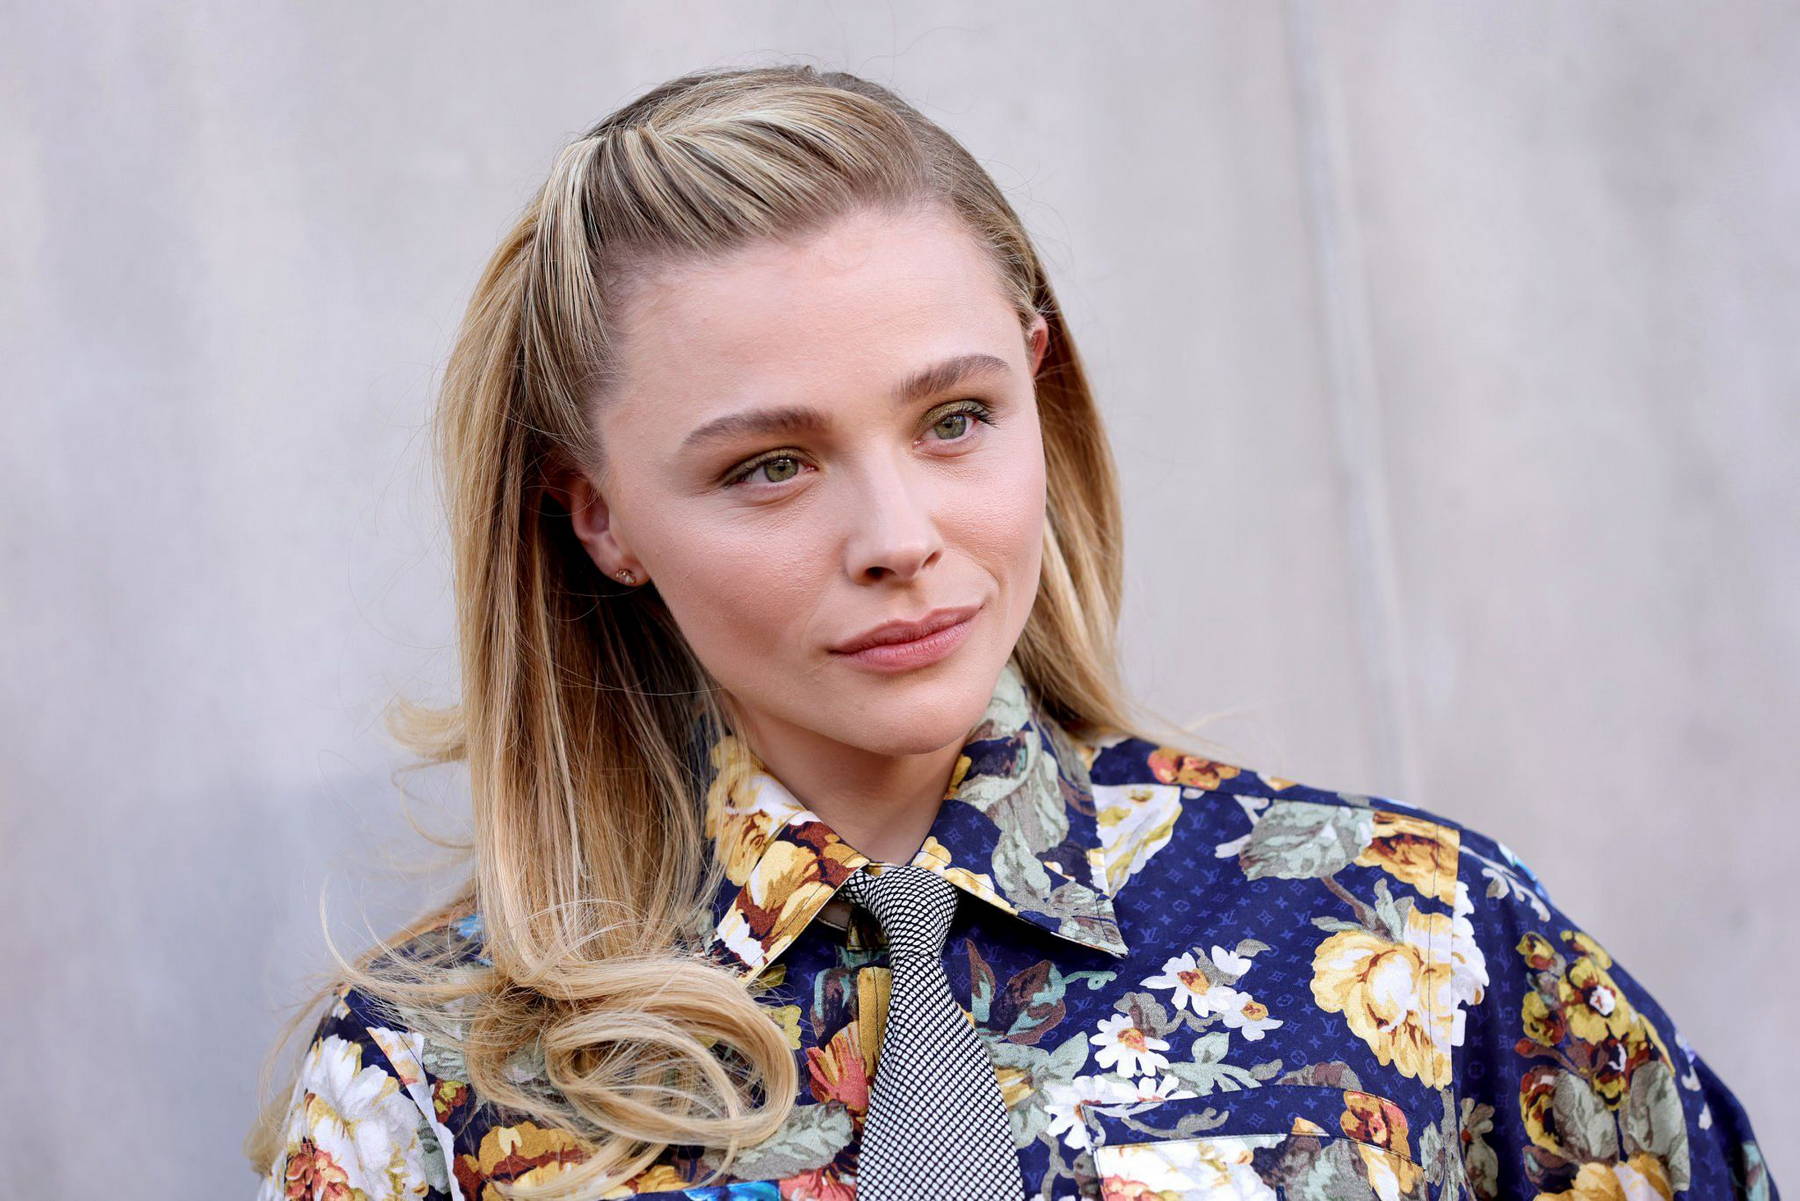 Chloe Grace Moretz stands out in a floral-print top at Louis Vuitton's 2023  Cruise Show in San Diego